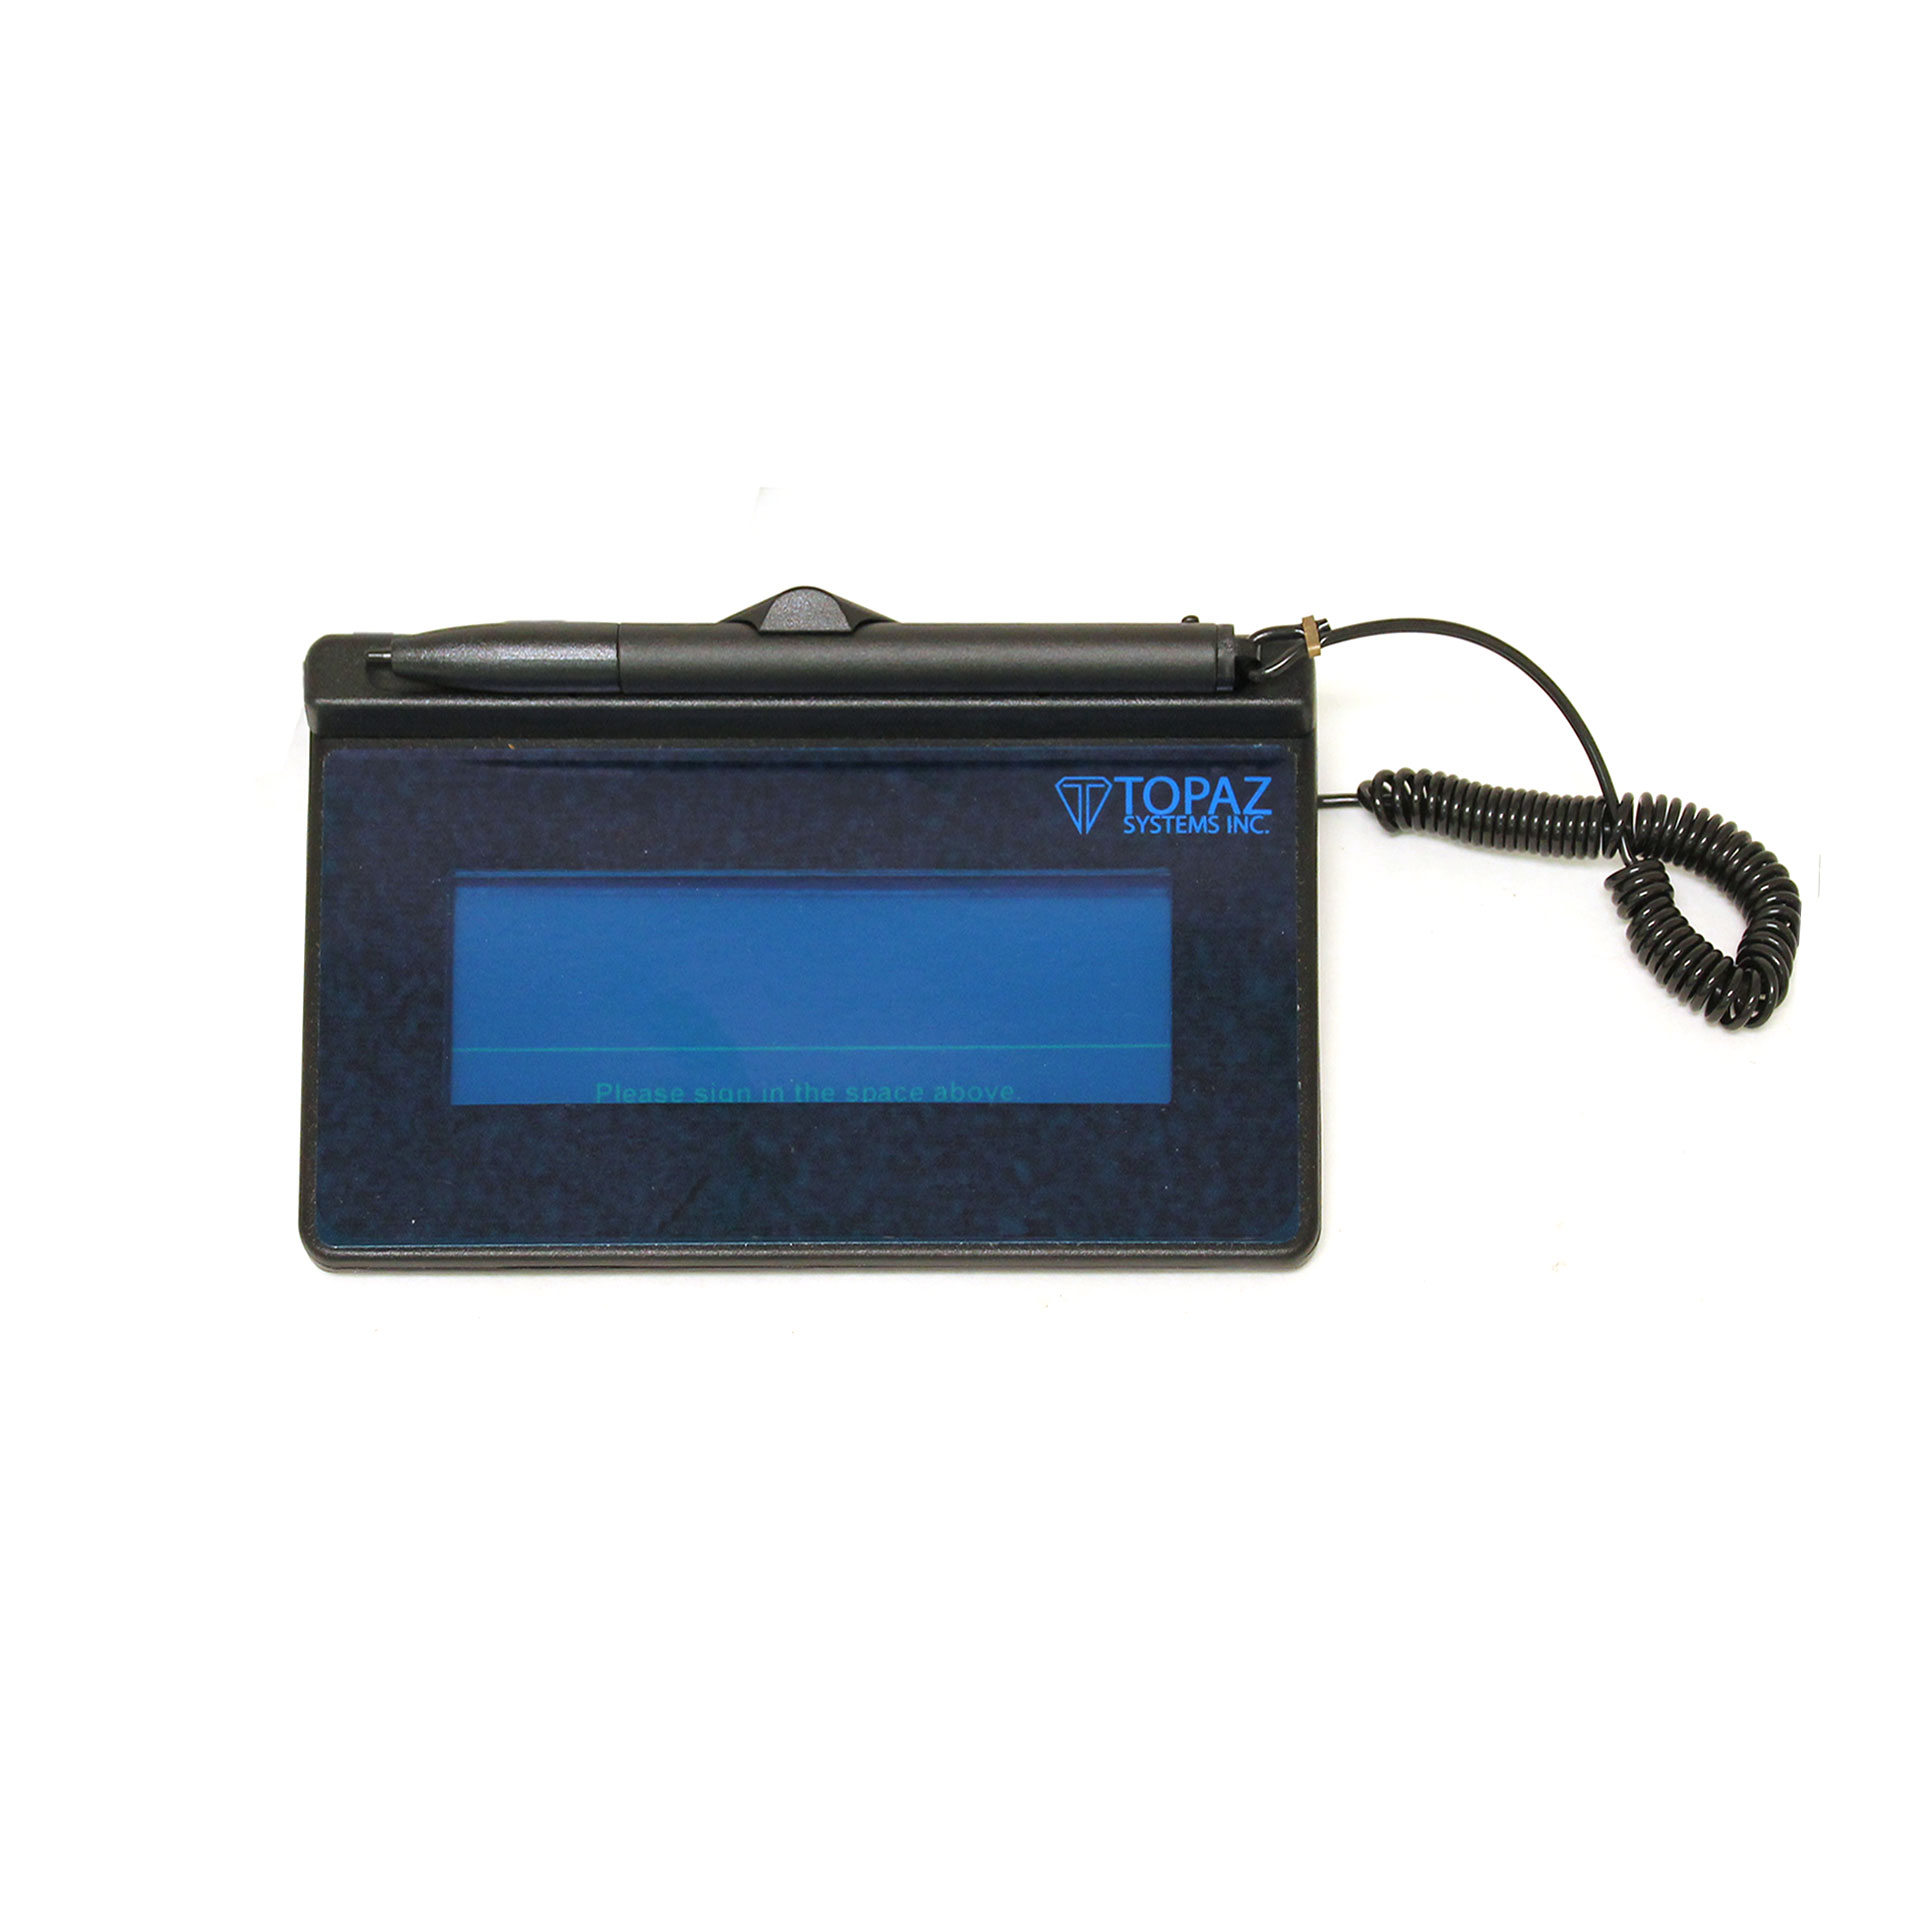 Topaz SigLite T-S460-HSB-R Wired Electronic Signature Pad